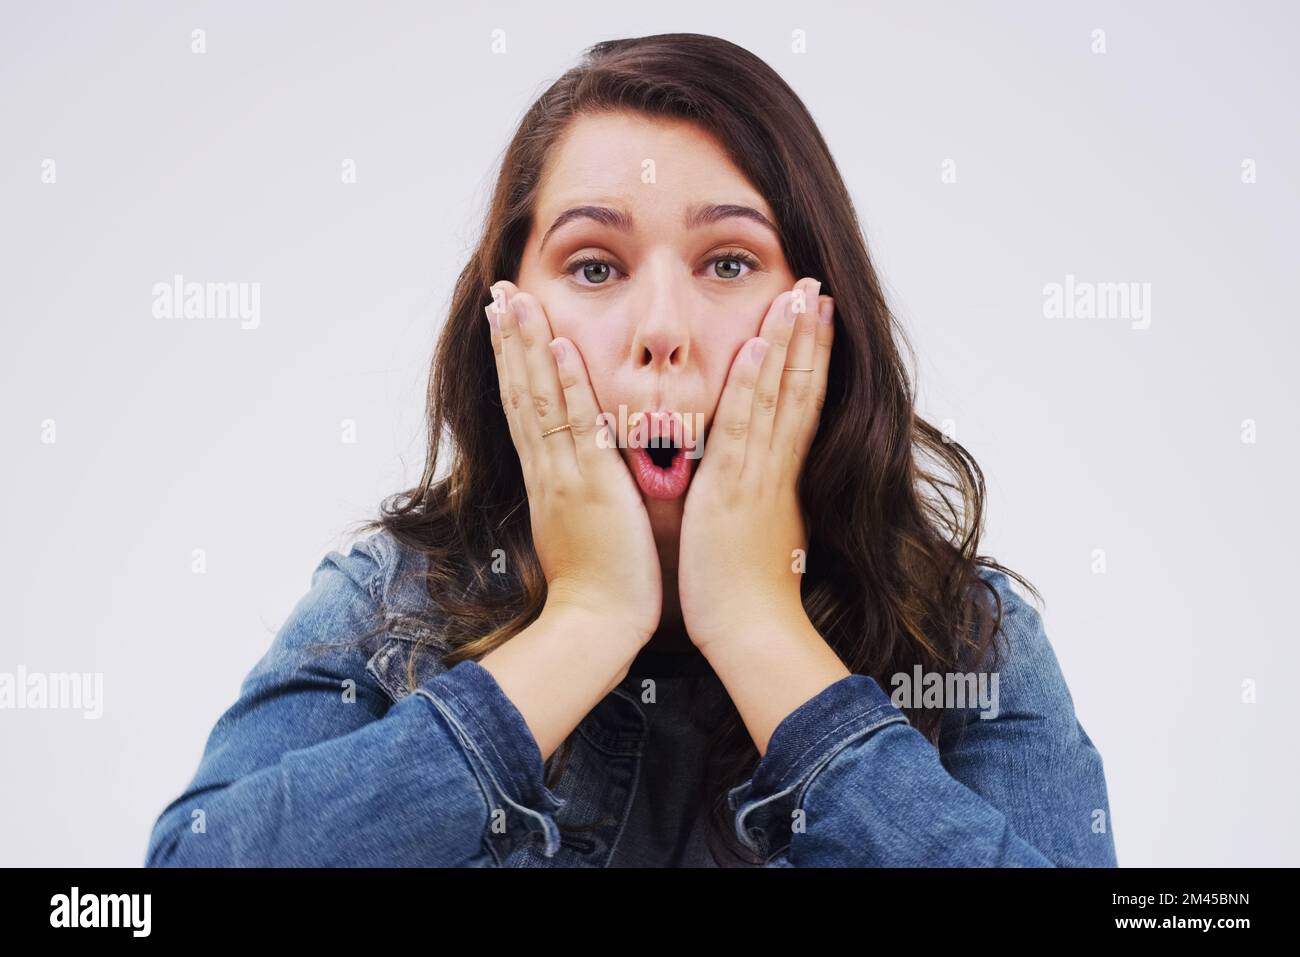 Im absolutely dumbstruck. Studio shot of a young woman making a funny face against a gray background. Stock Photo